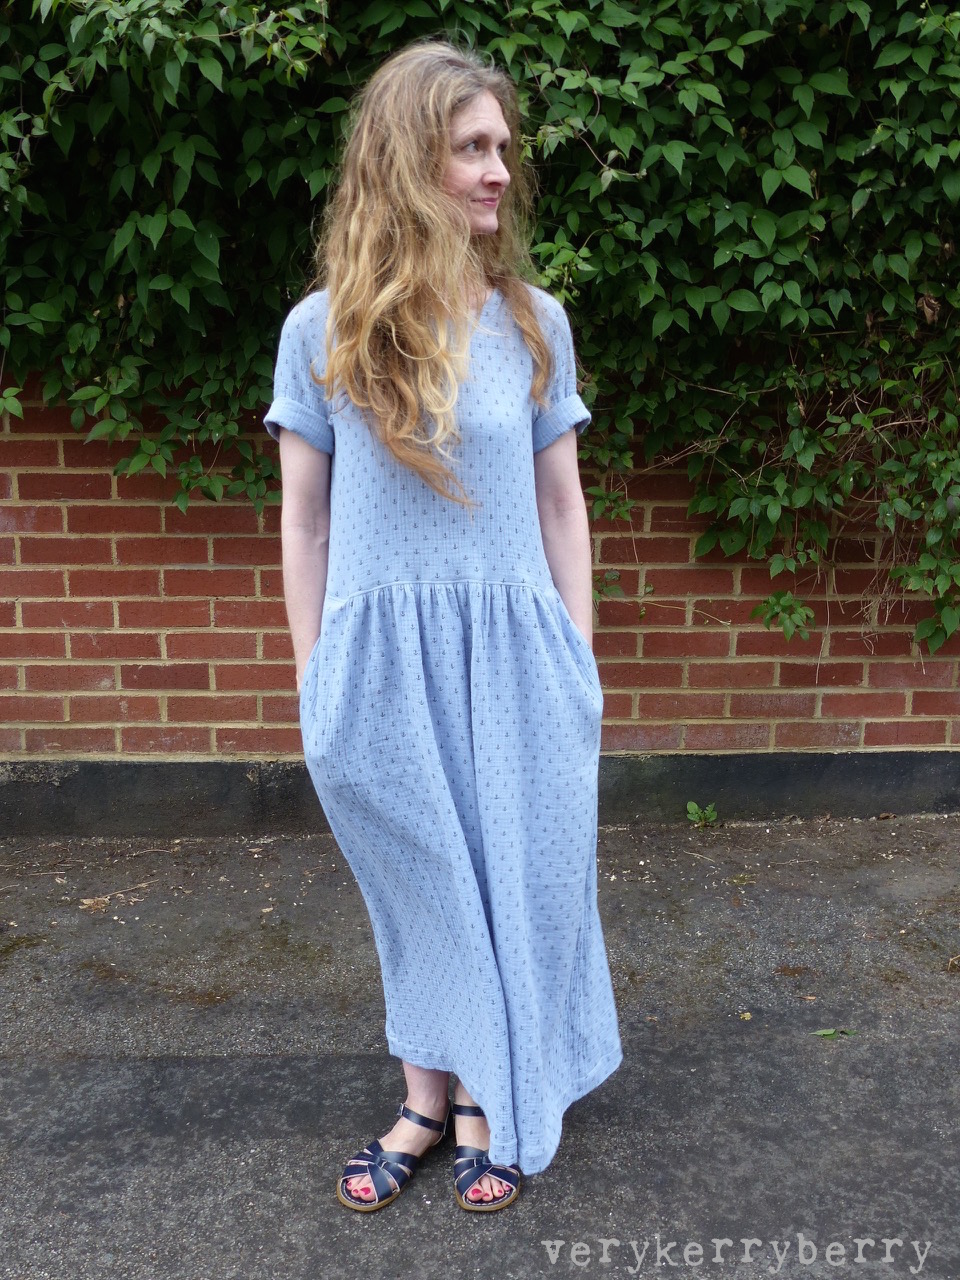 verykerryberry: The Gathered Dress Hack: Maxi Version